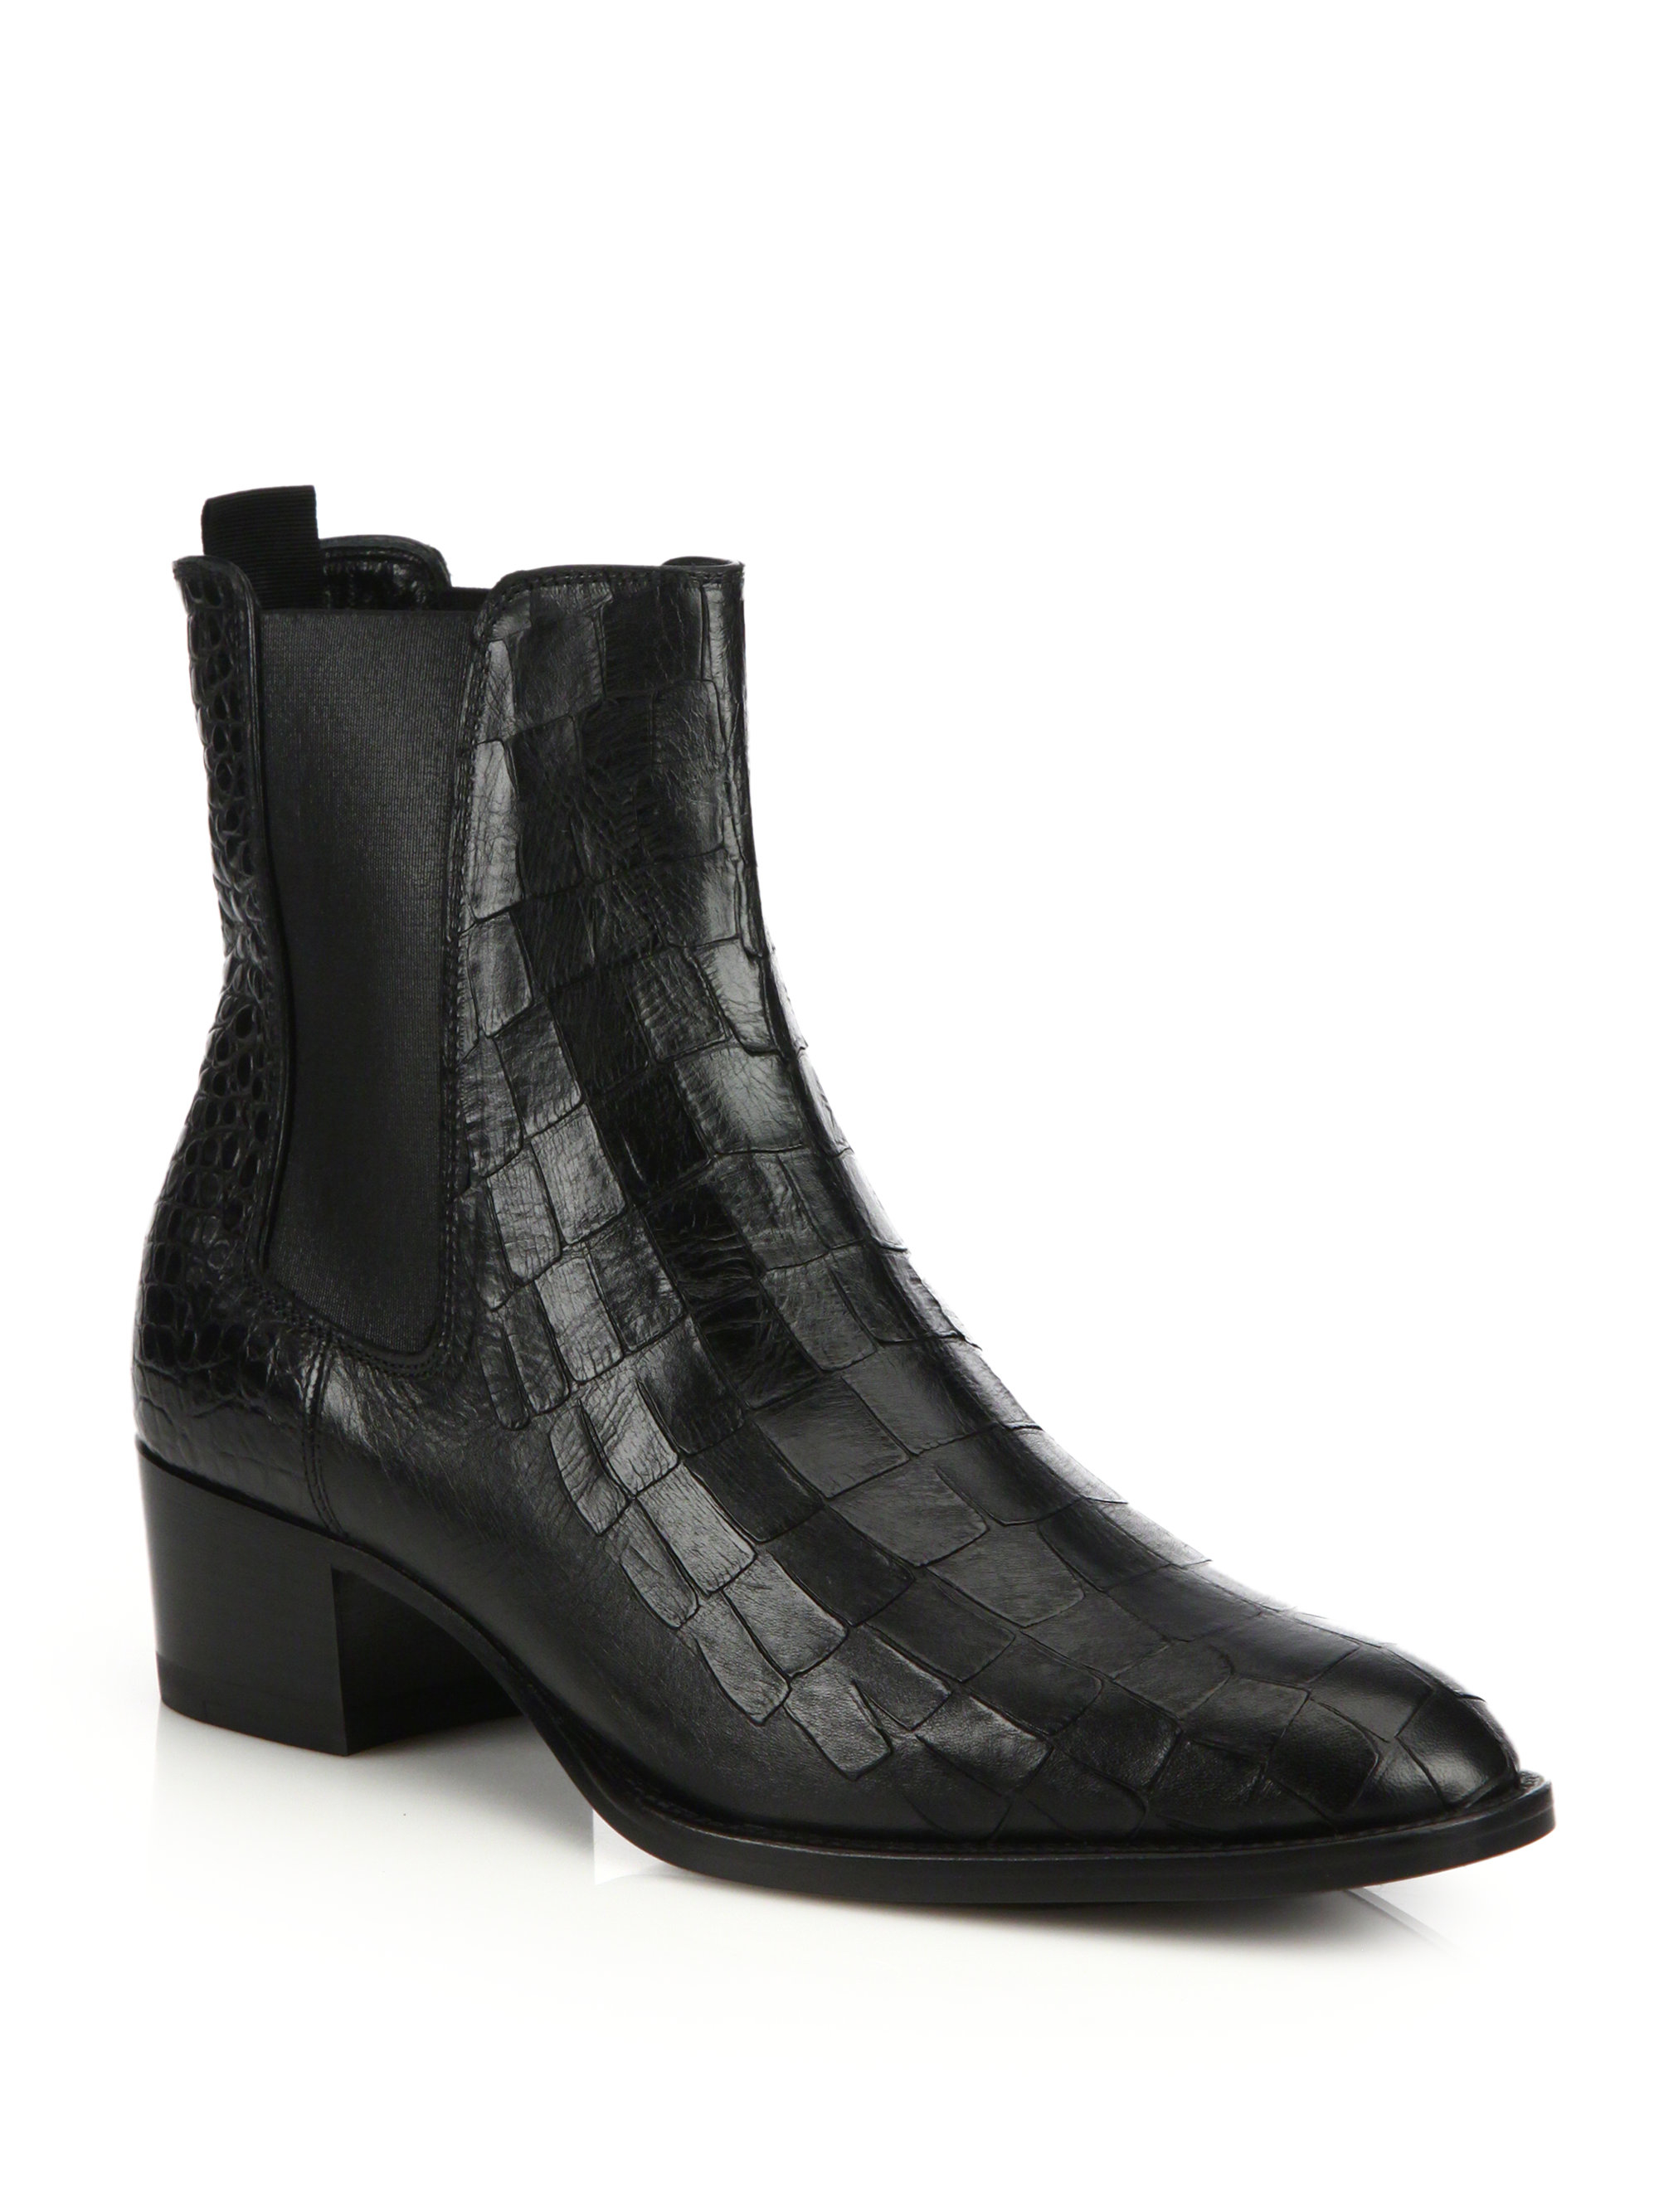 Lyst - Saint Laurent Croc-Embossed Leather Ankle Boots in Black